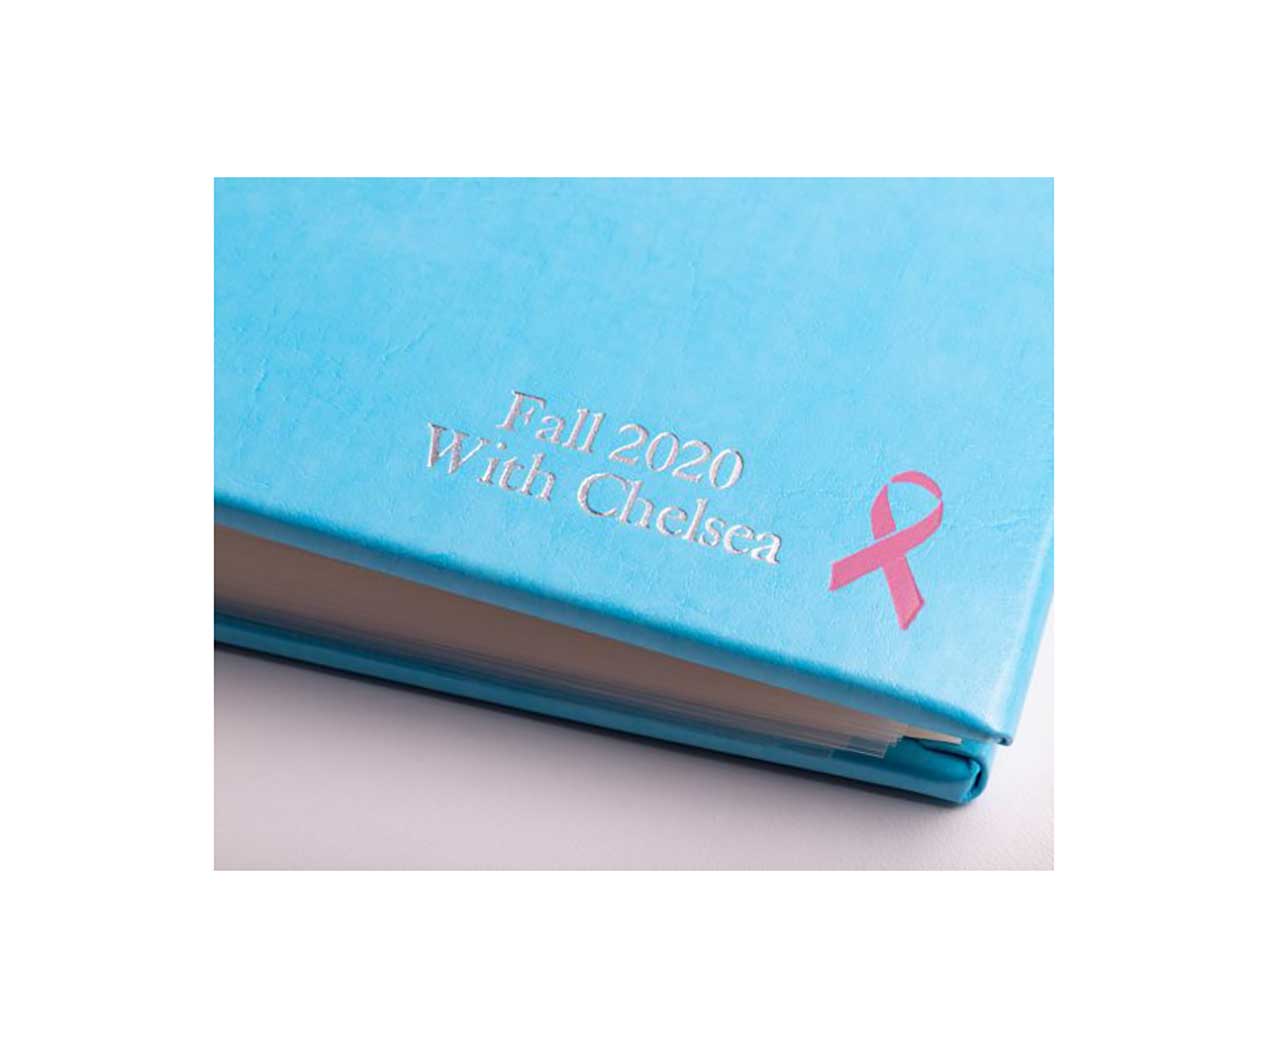 compact_album_acada_pool_with_pink_ribbon_and_personalization_corner_detail_1---Lindsay-Ouellette.jpg